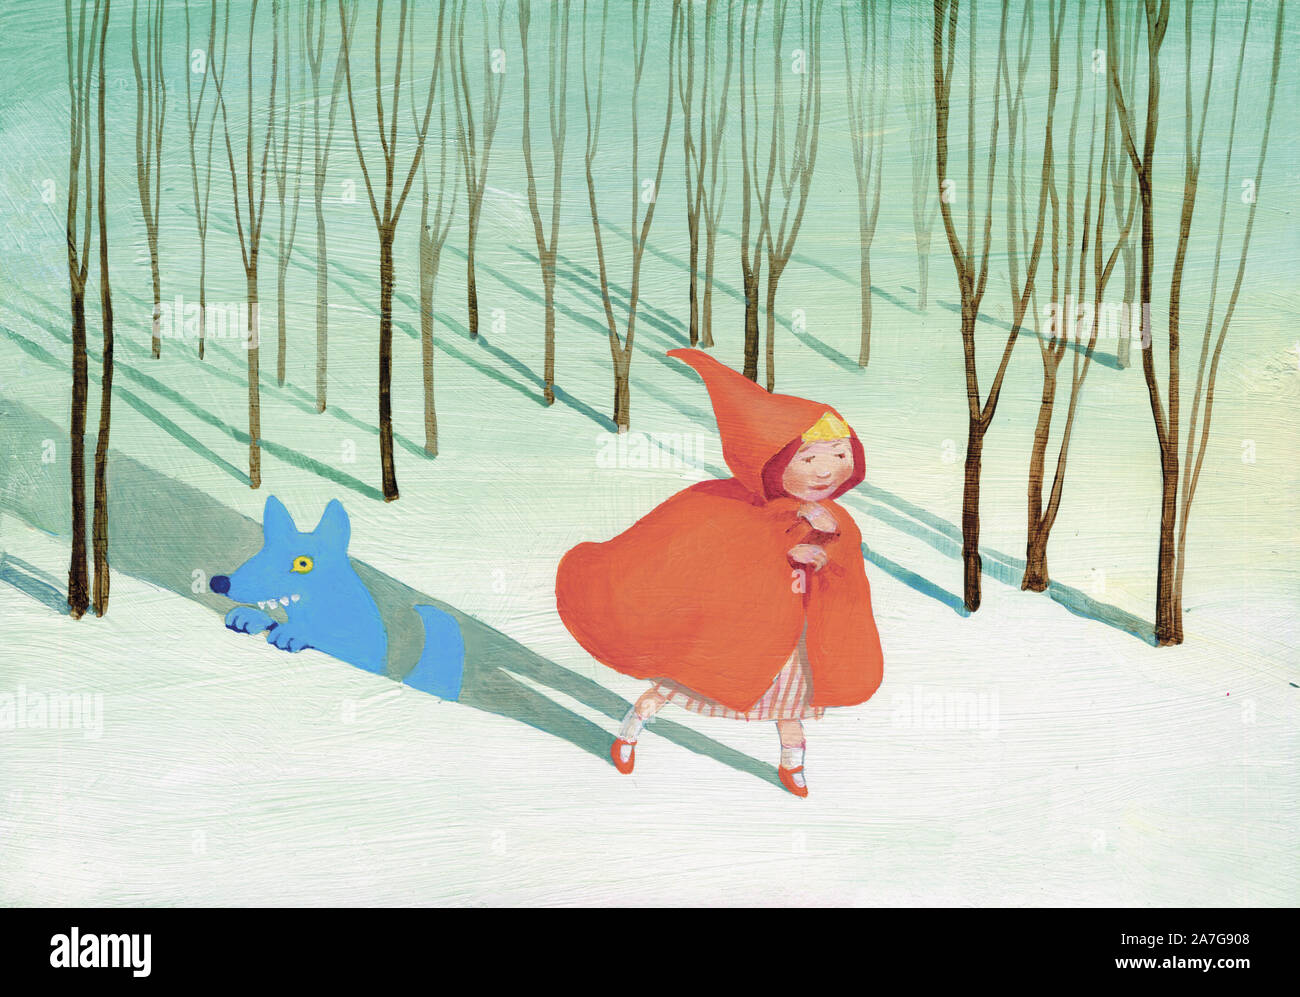 little red riding hood cape in the forest in winter in its shade comes out a blue wolf a child fairy tale illustration conceptual surreal painting Stock Photo